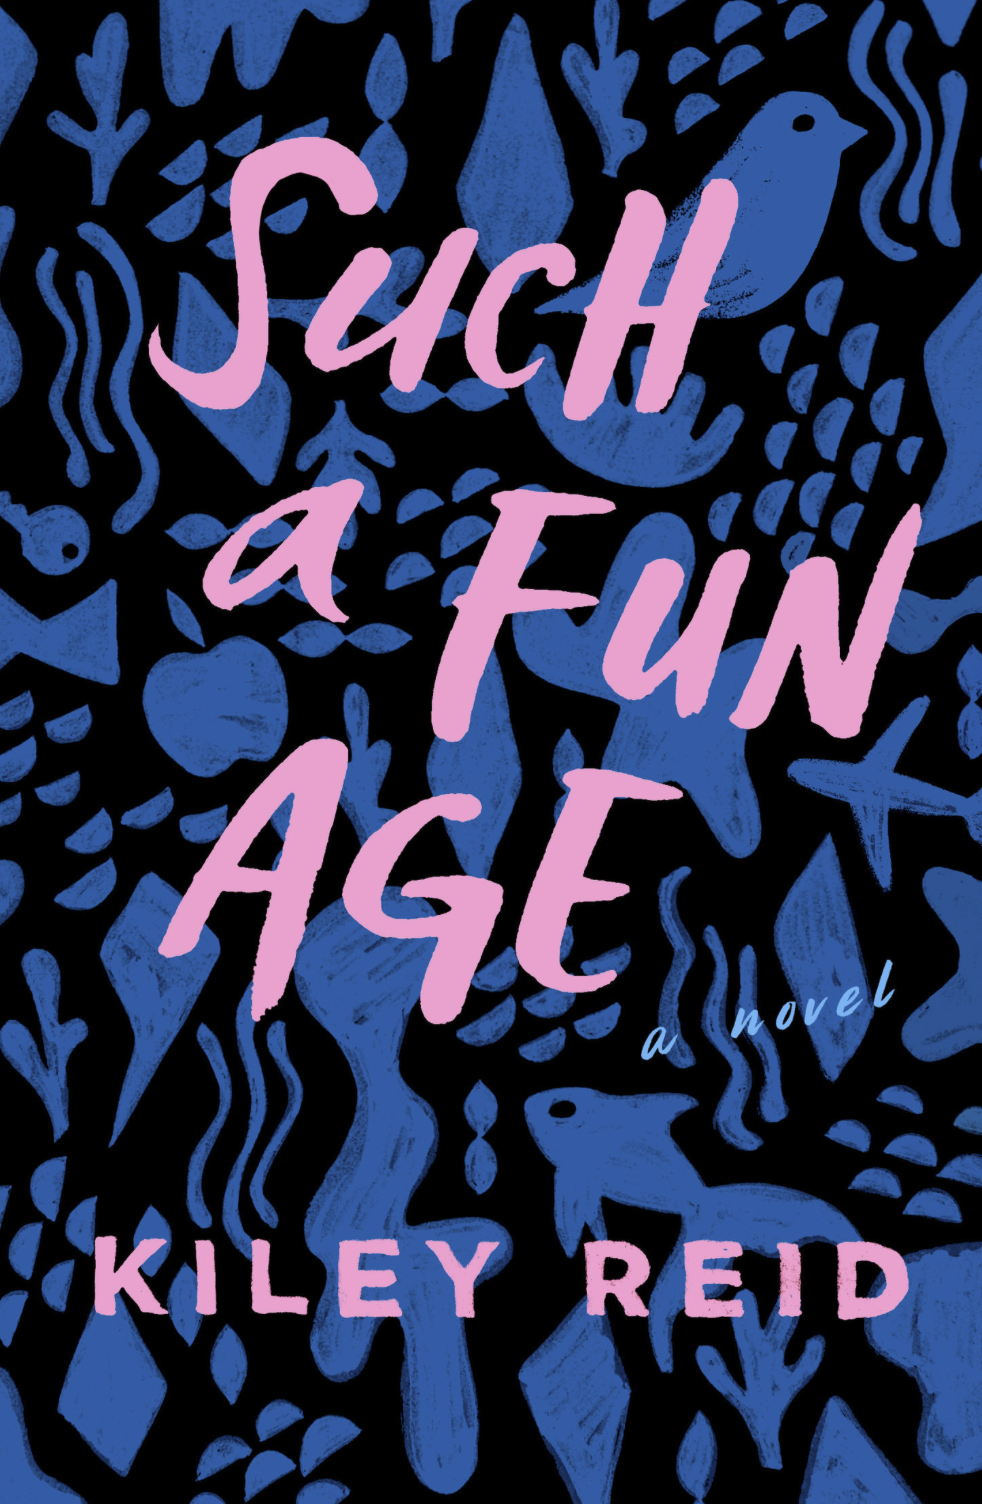 The fourth book I read as part of this monthly roundup: A picture of a book cover for Such a Fun Age.